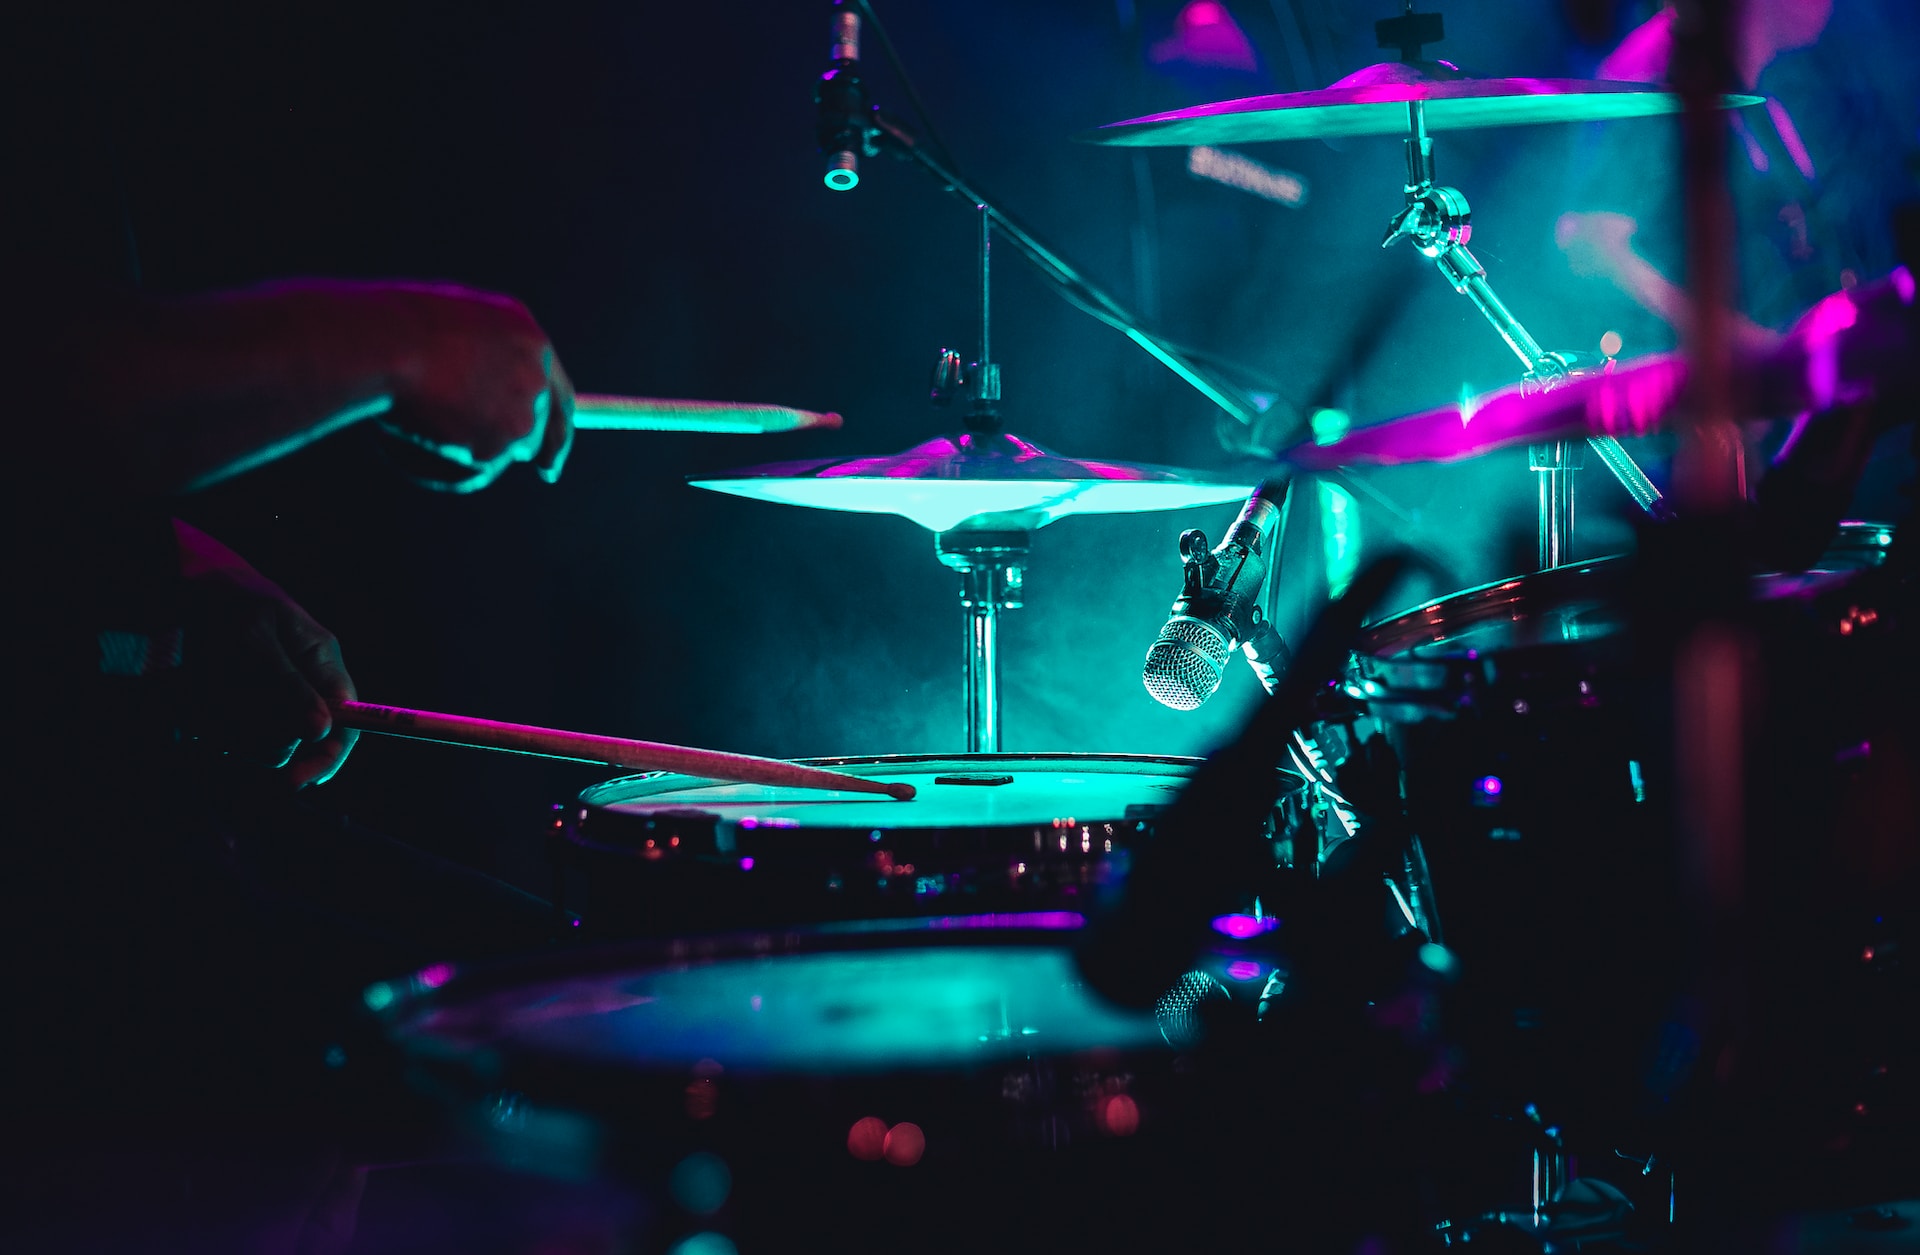 A set of drums in green/blue lighting